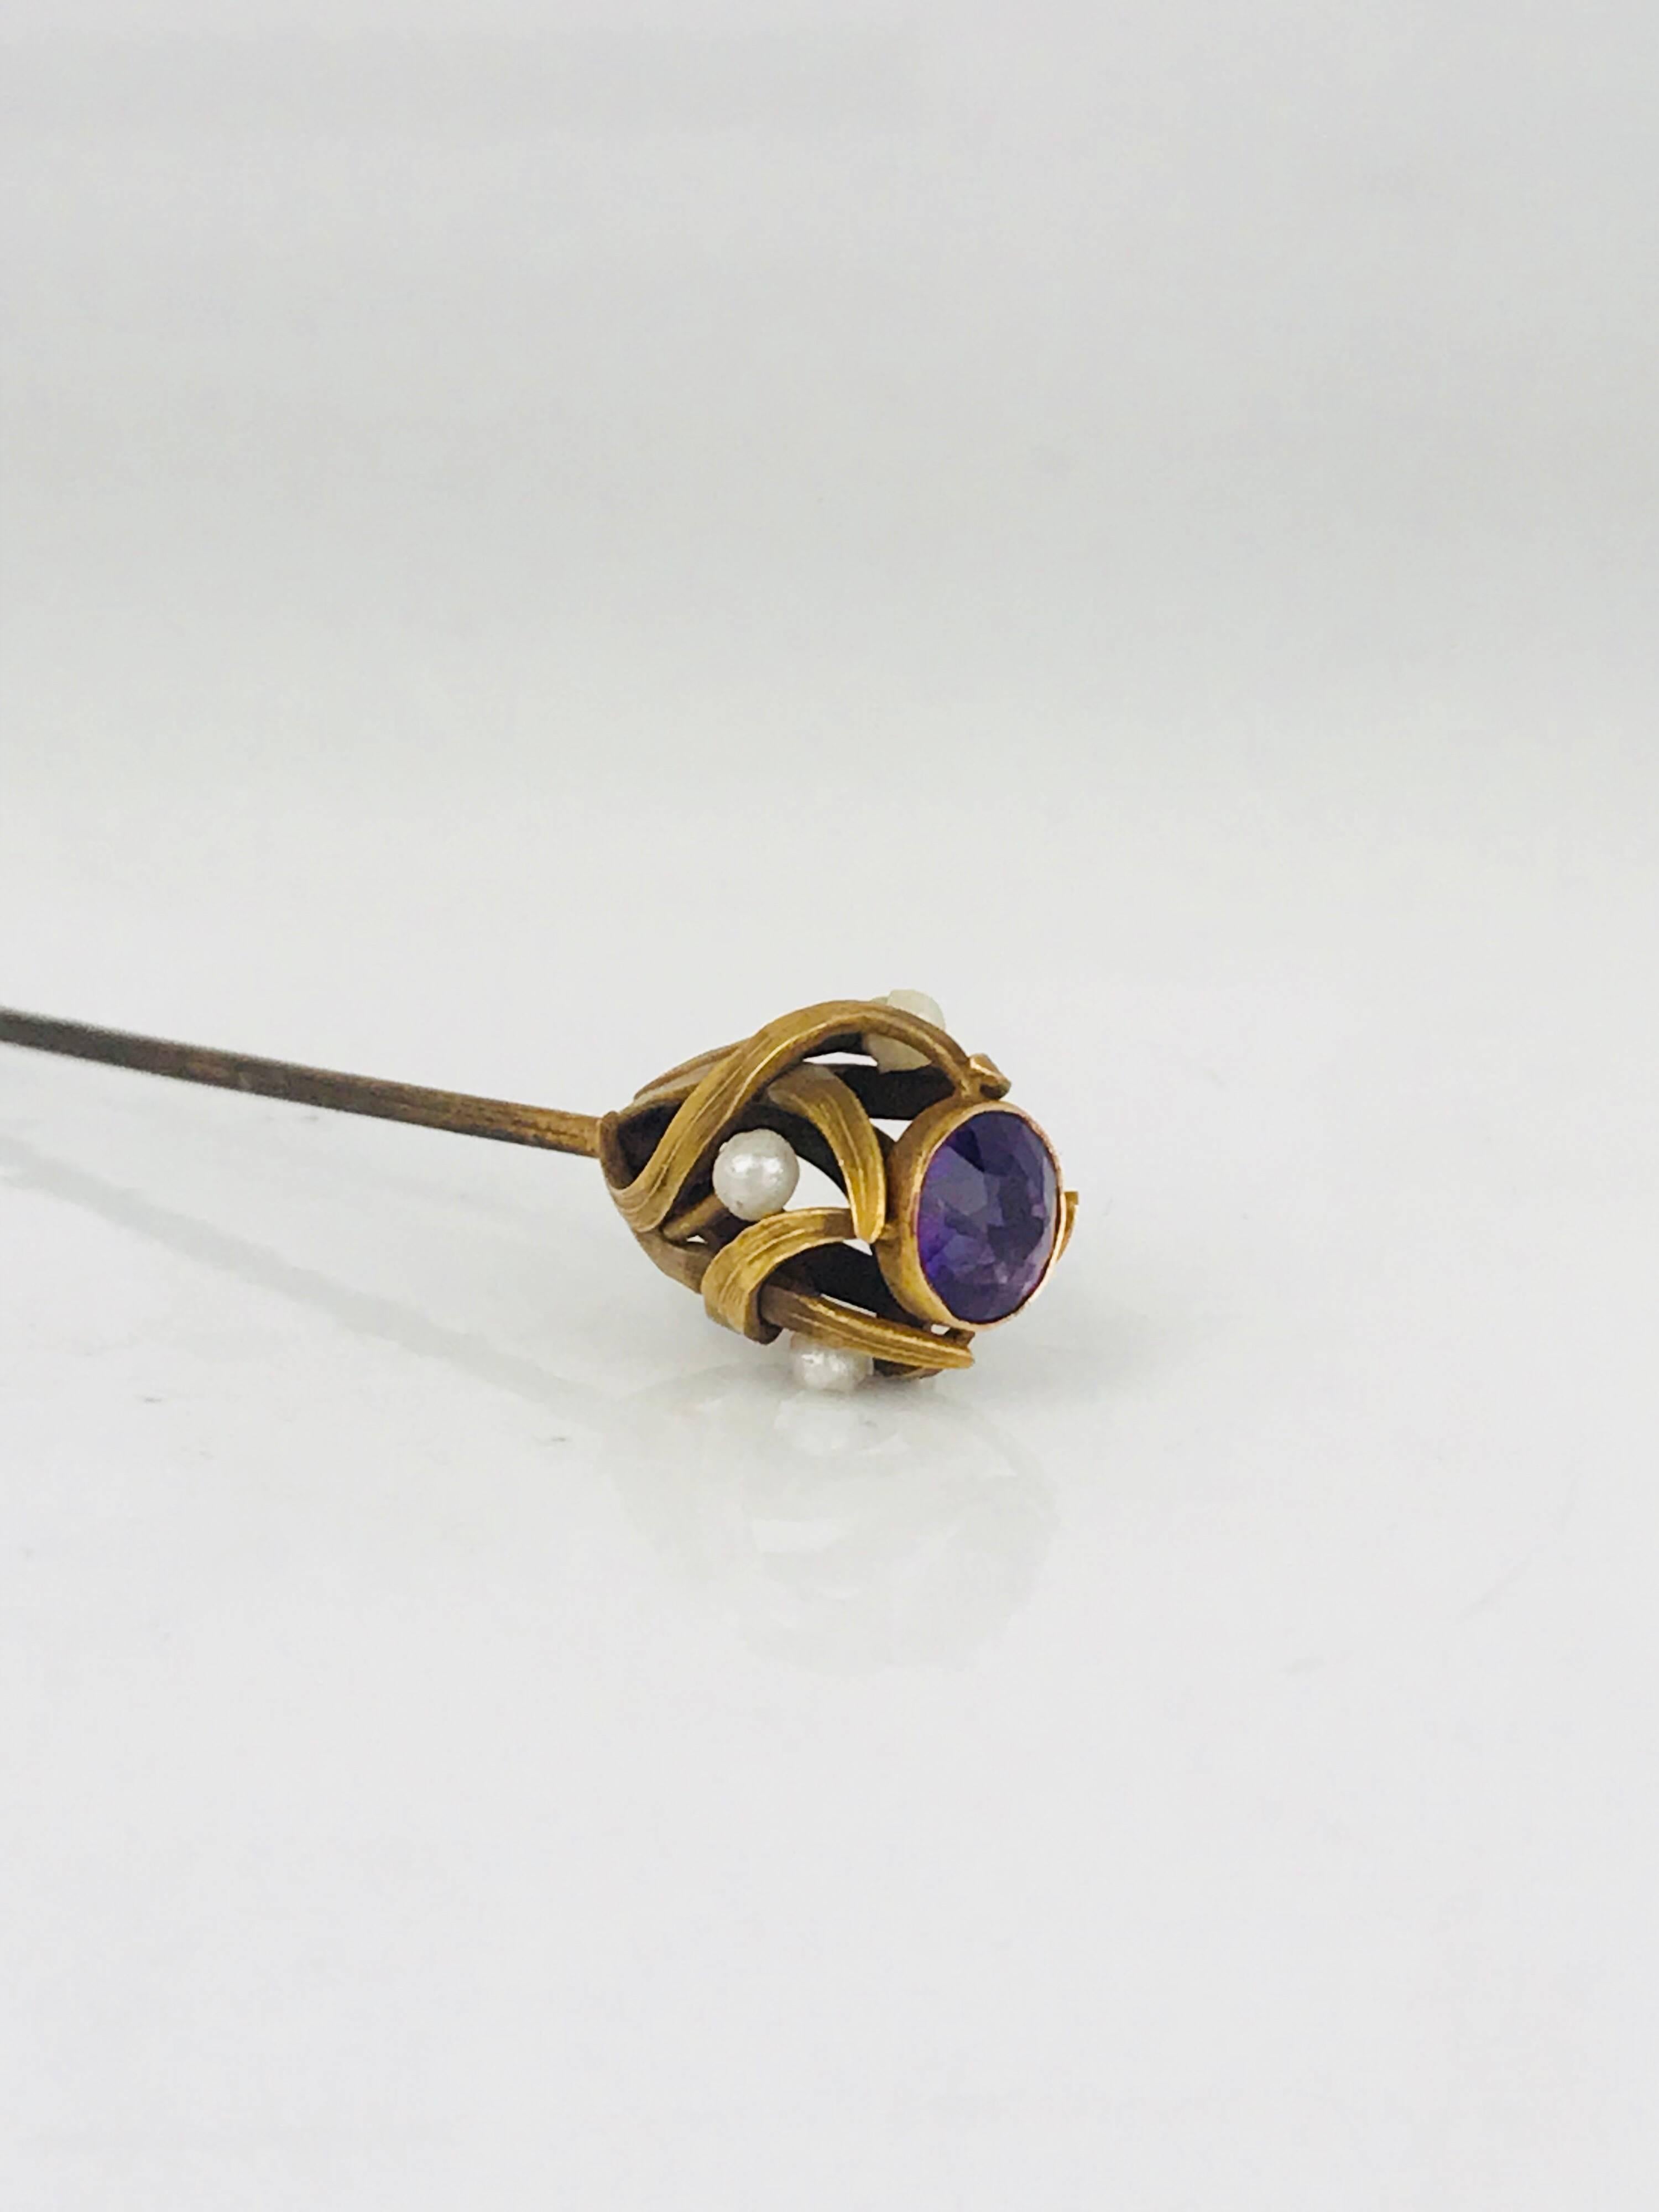 Victorian, 14 Karat, Old Mine-Cut Amethyst and Seed Pearl Hat Pin, circa 1840 In Excellent Condition For Sale In Aliso Viejo, CA